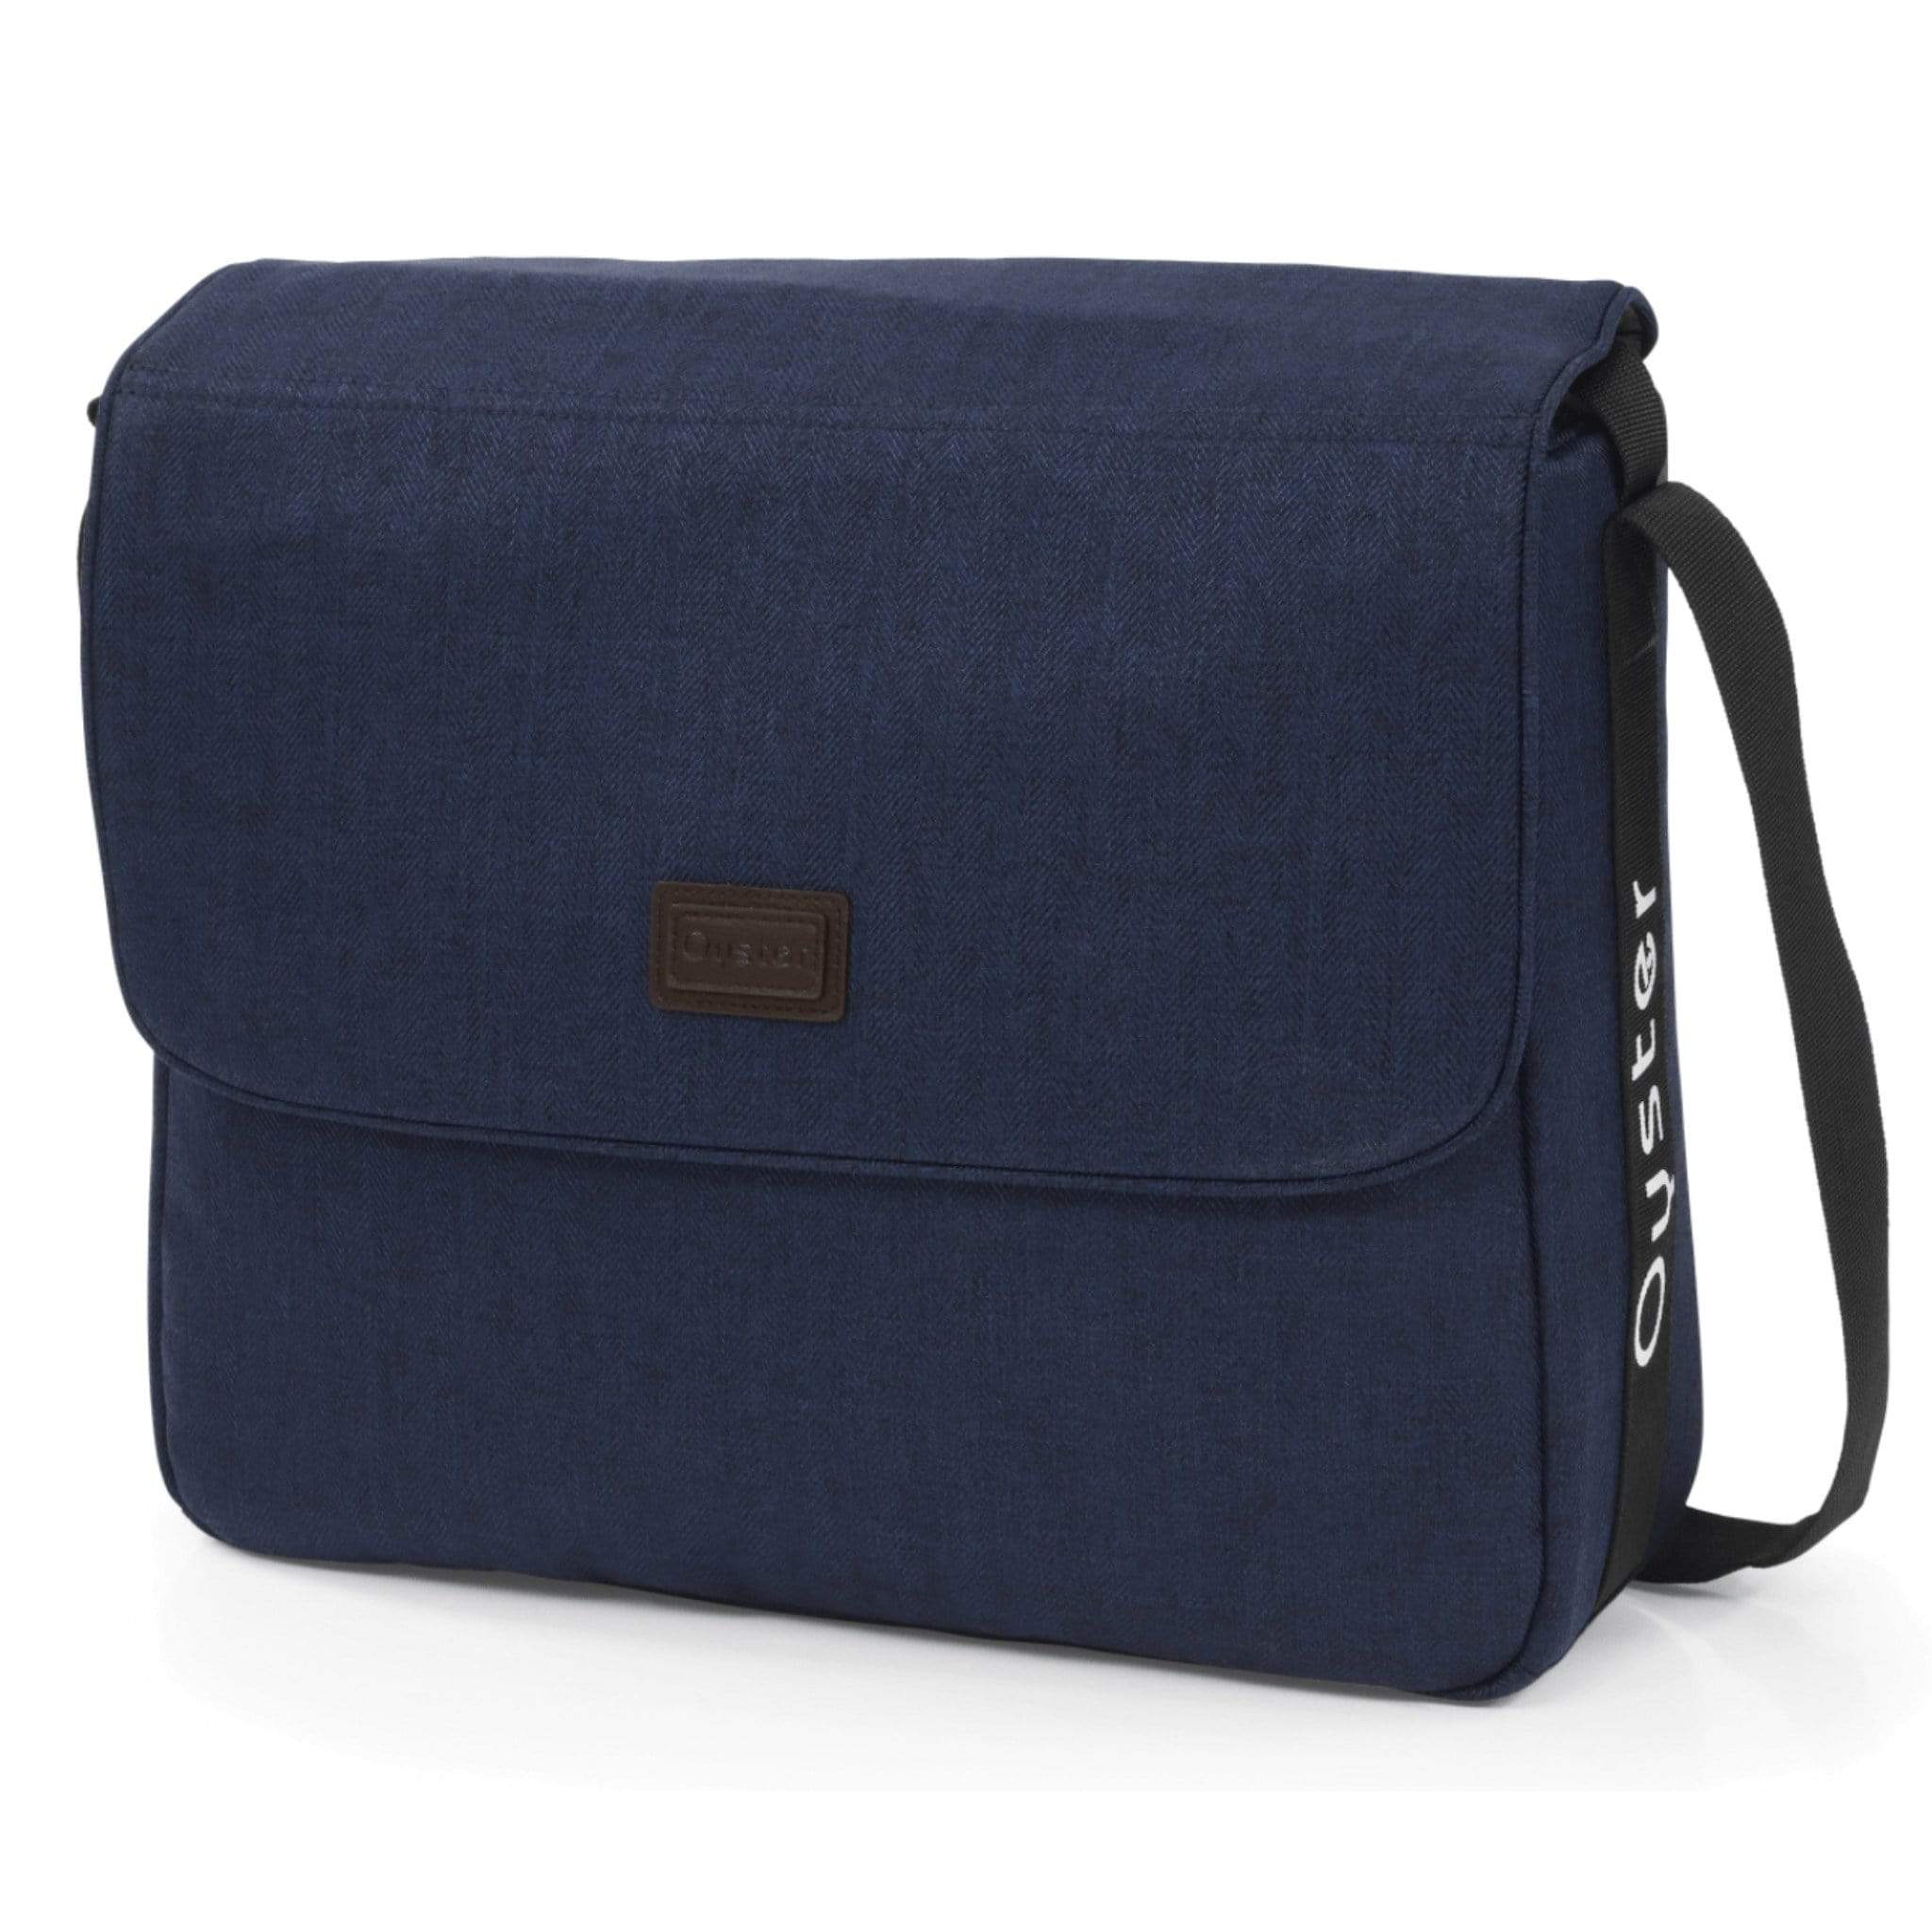 BabyStyle Oyster3 Changing Bag Rich Navy Changing Bags O3CBRI 5060711561745